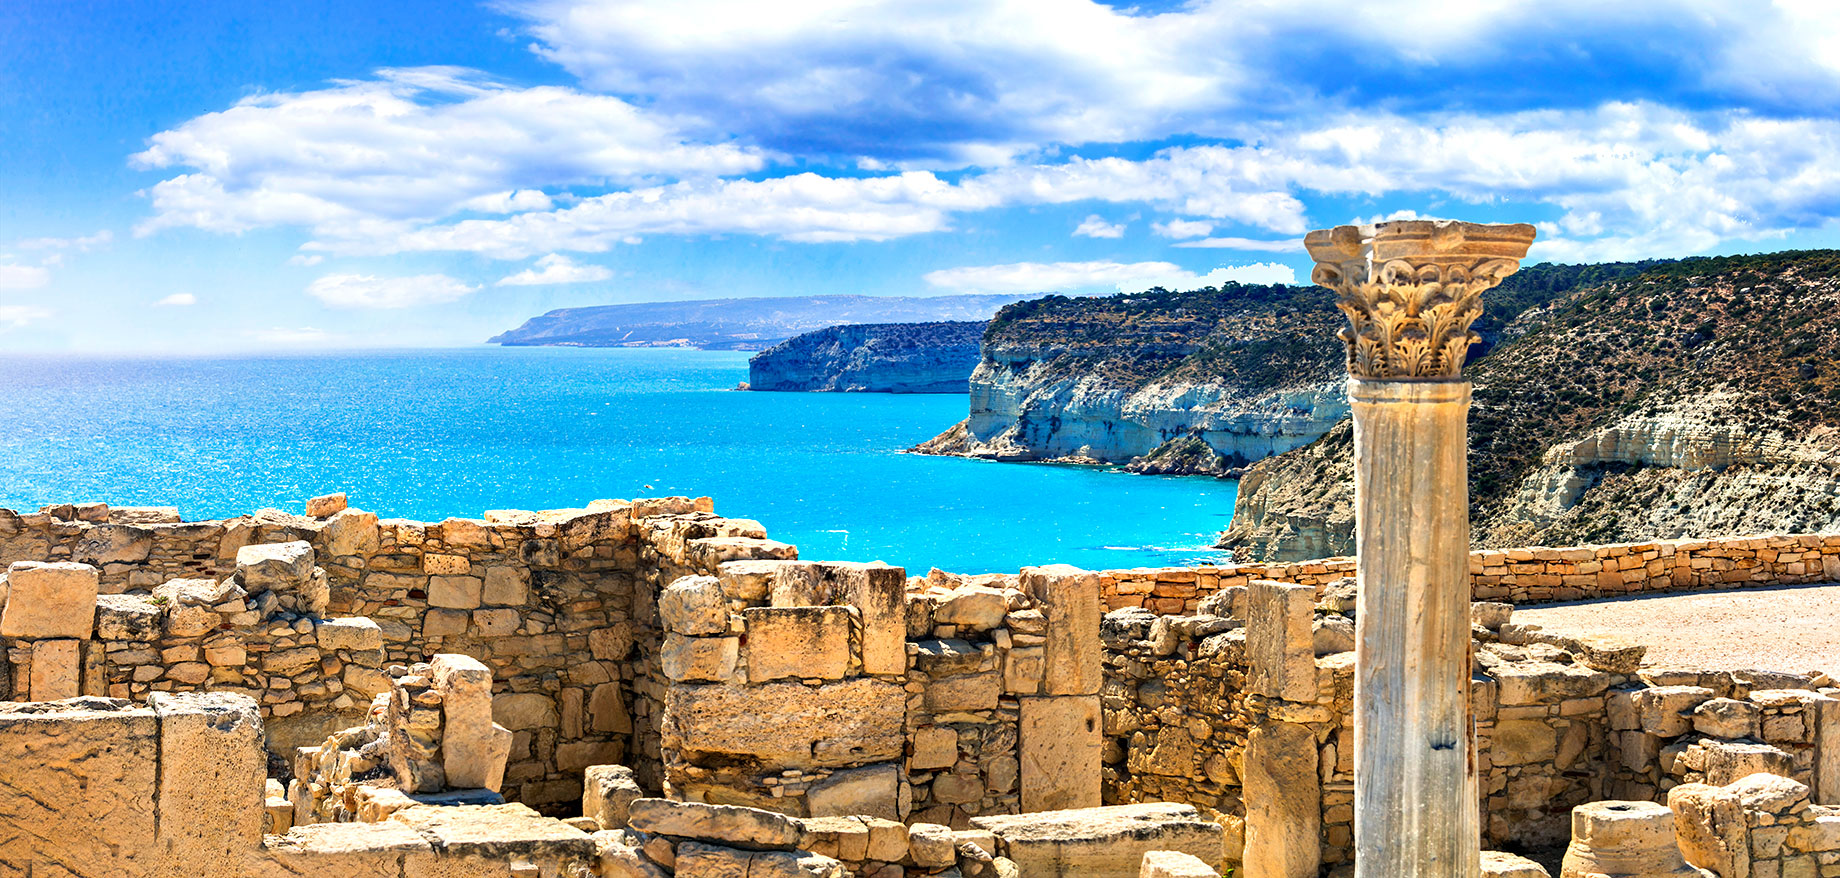 Ancient Kourion Archaeological Site - Cyprus